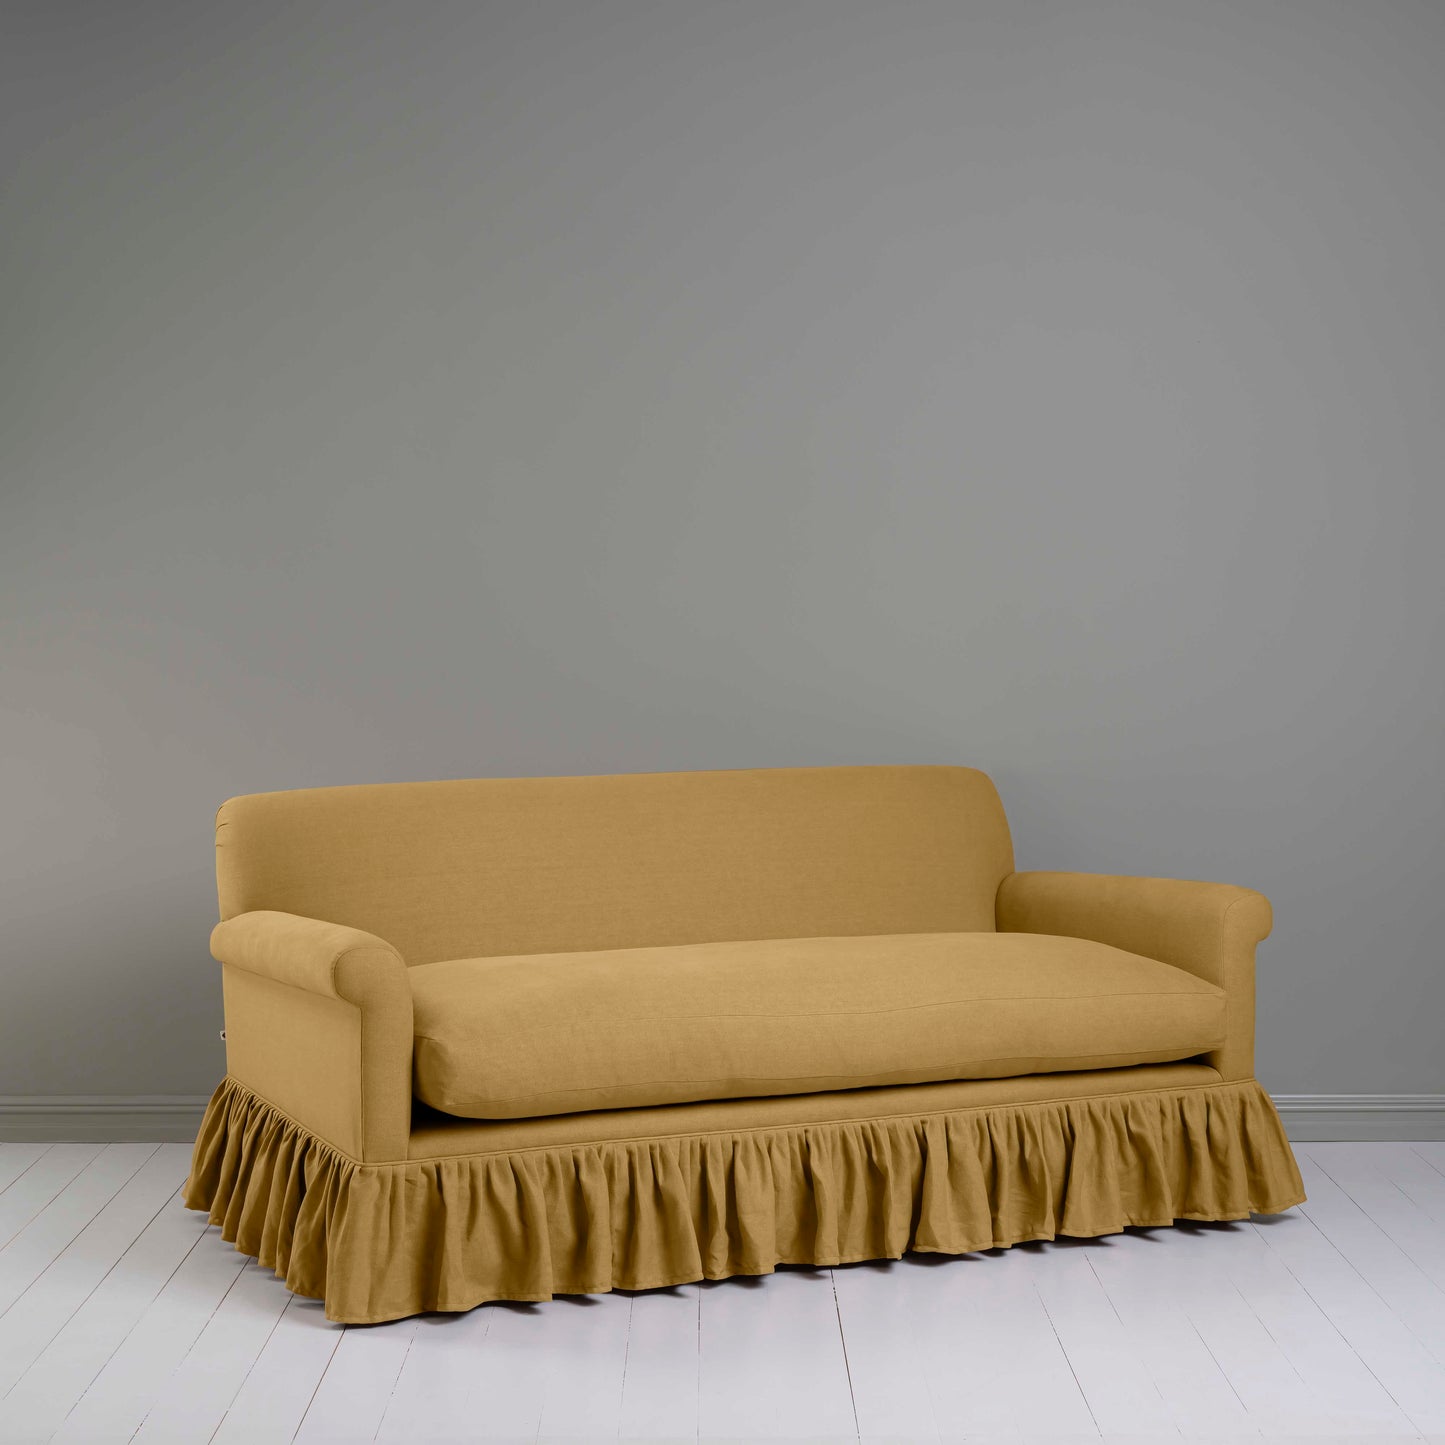 Curtain Call 3 Seater Sofa in Laidback Linen Ochre